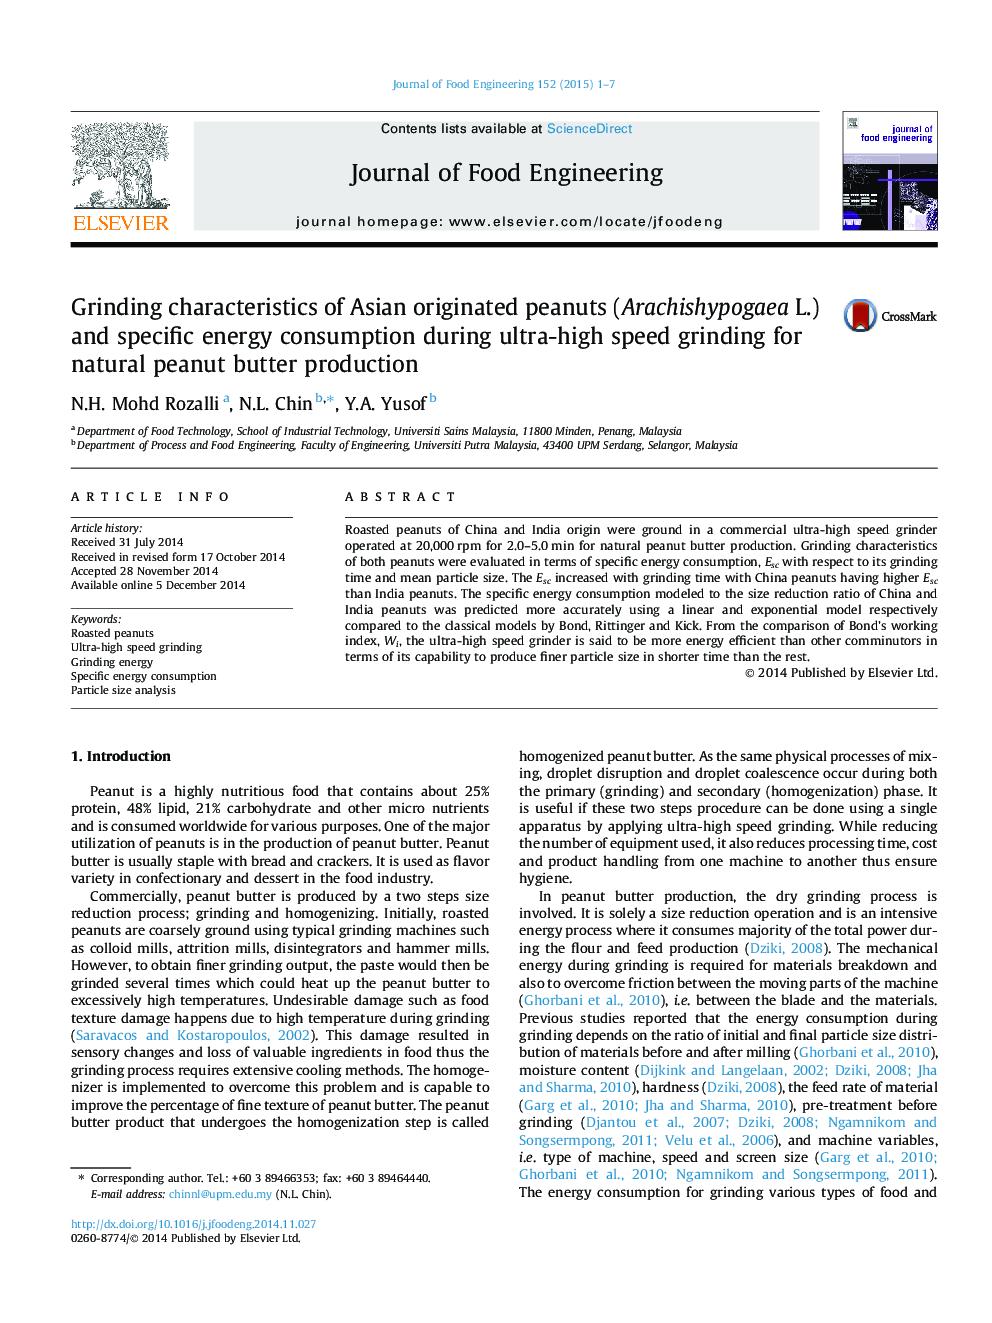 Grinding characteristics of Asian originated peanuts (Arachishypogaea L.) and specific energy consumption during ultra-high speed grinding for natural peanut butter production